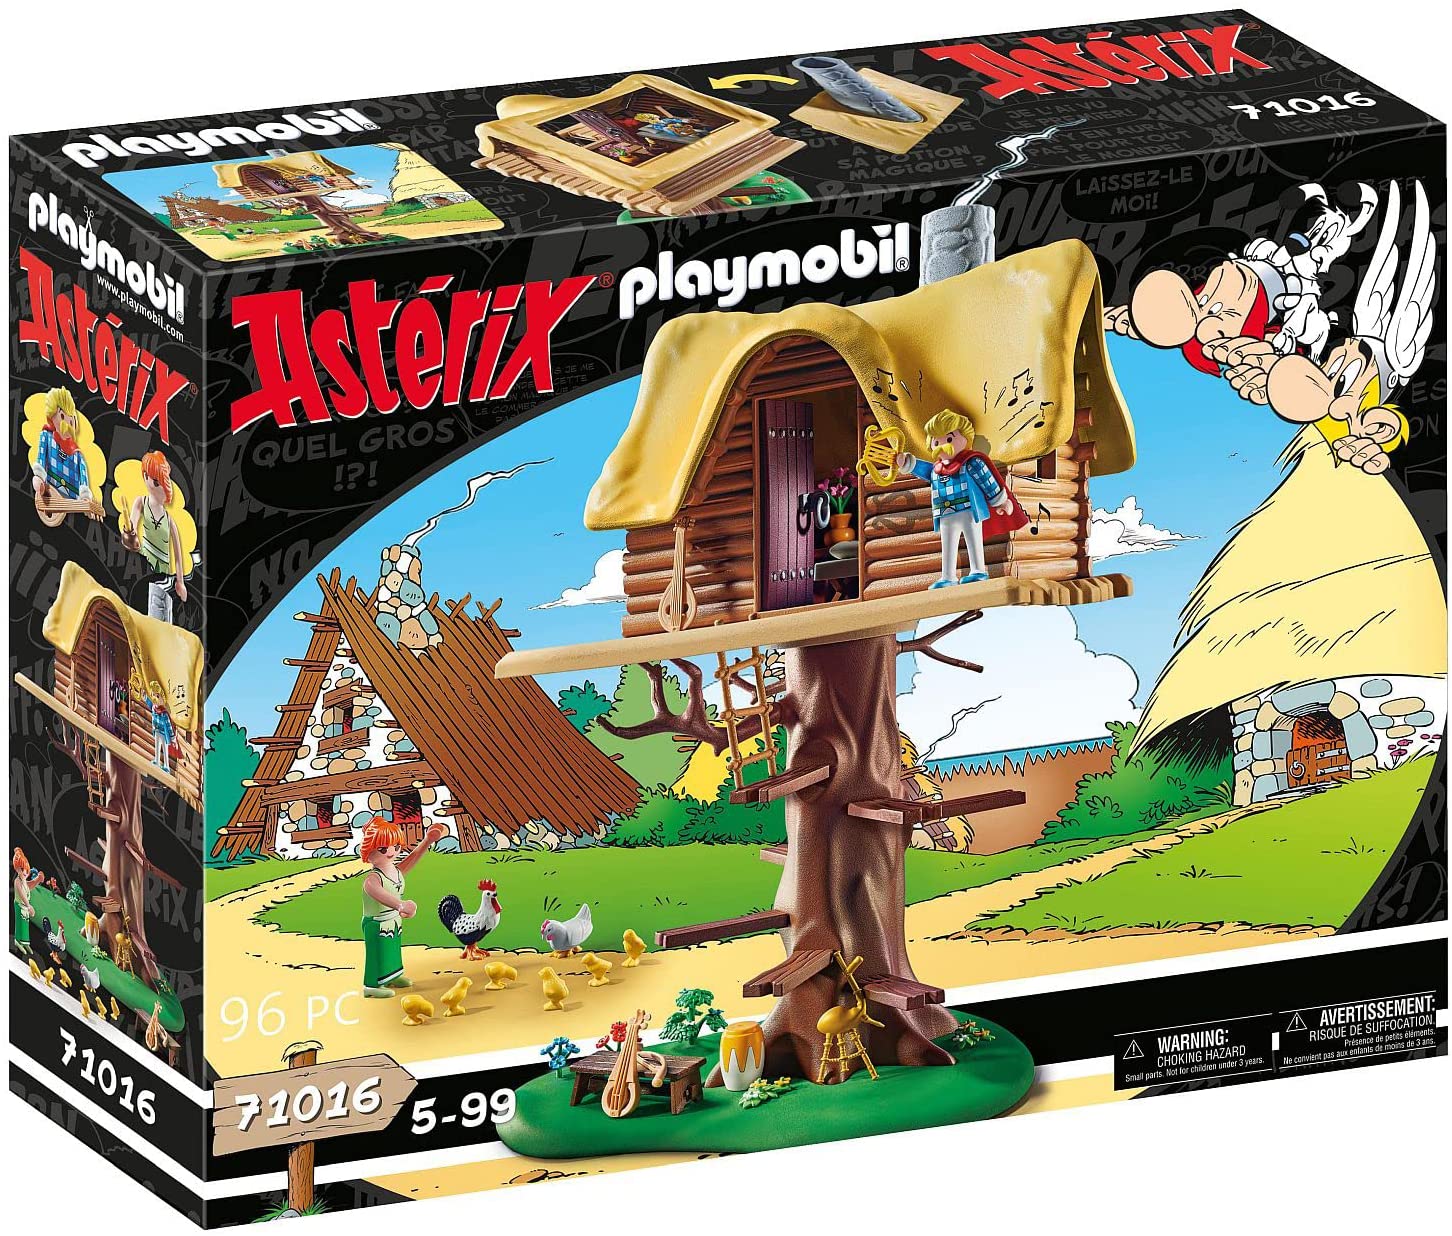 PLAYMOBIL Asterix 71016 Troubadix with Tree House, Toy for Children Aged 5+